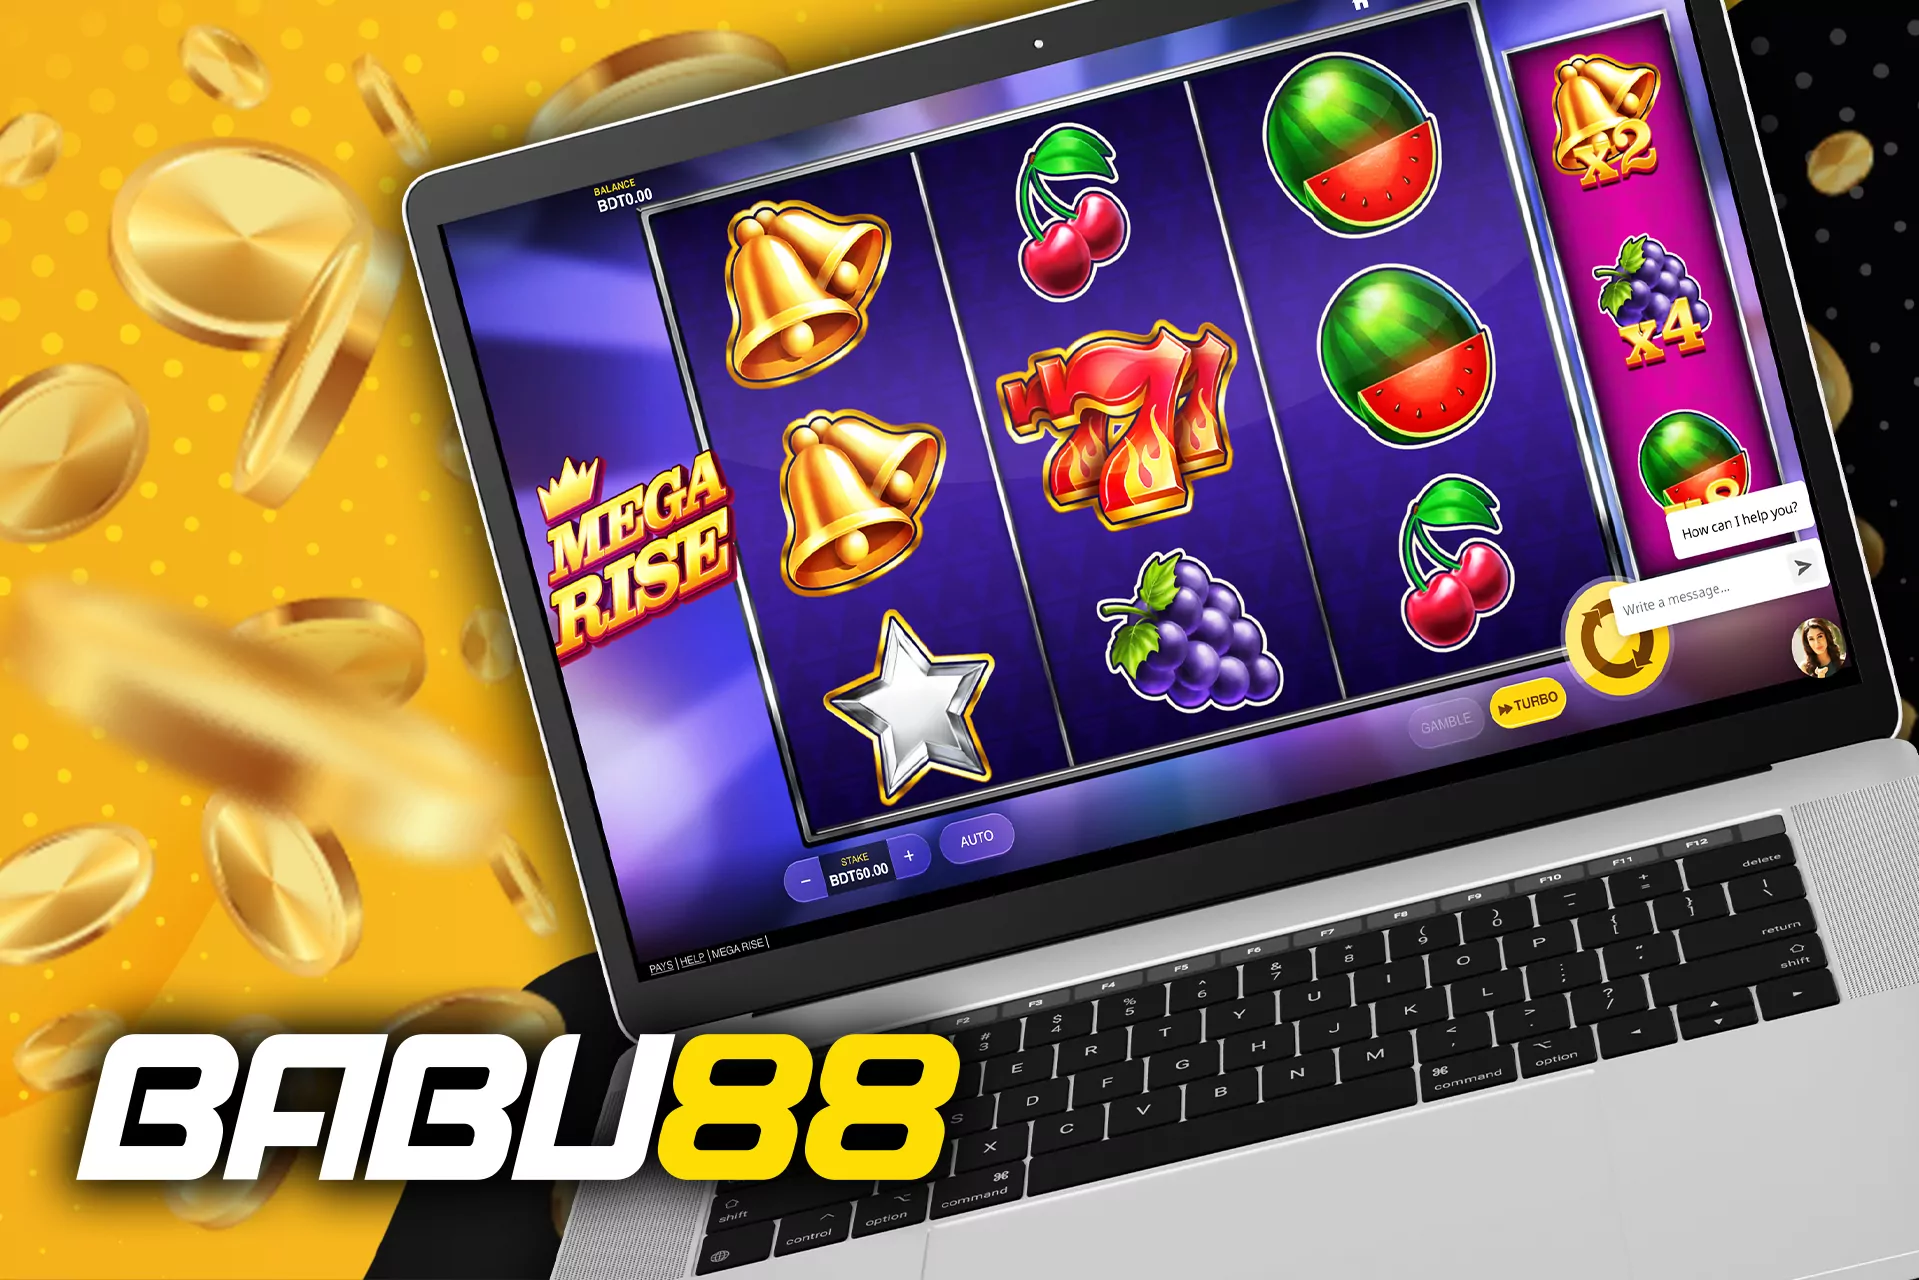 Play jackpot games to get an opportunity to win big money.